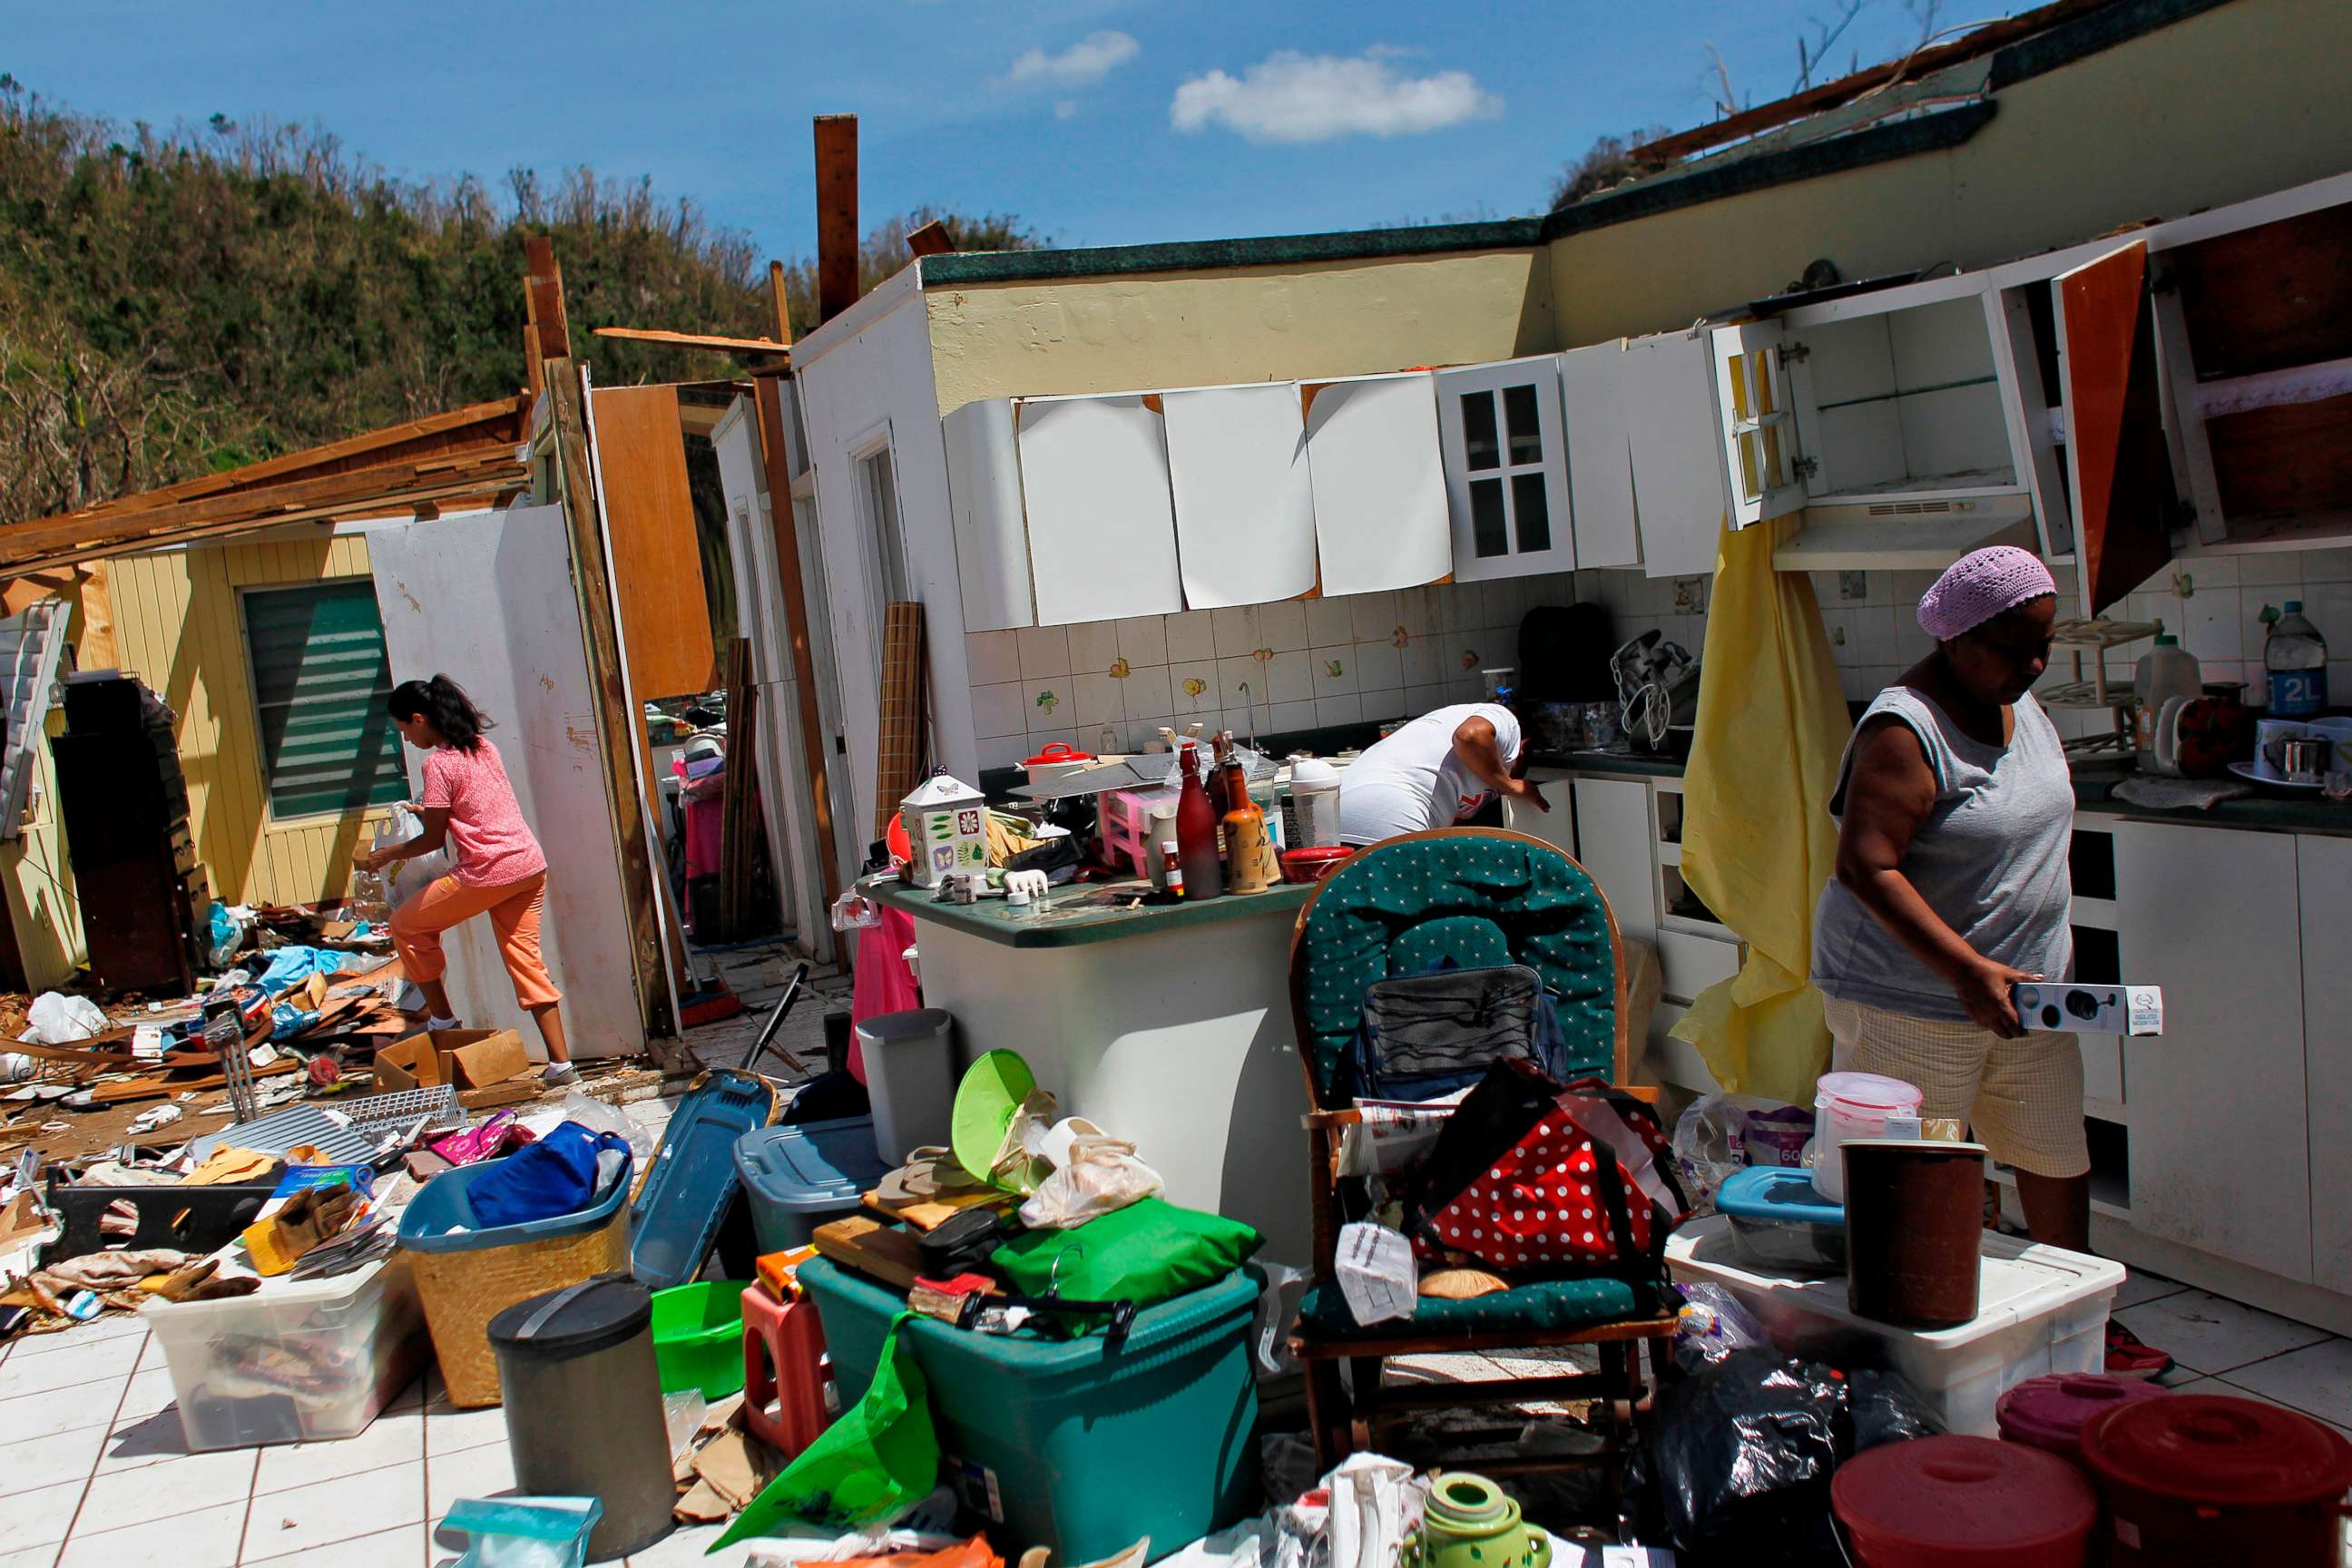 PHOTO: Family members collect belongings after hurricane force winds destroyed their house in Toa Baja, west of San Juan, Puerto Rico, on Sept. 24, 2017, following the passage of Hurricane Maria.